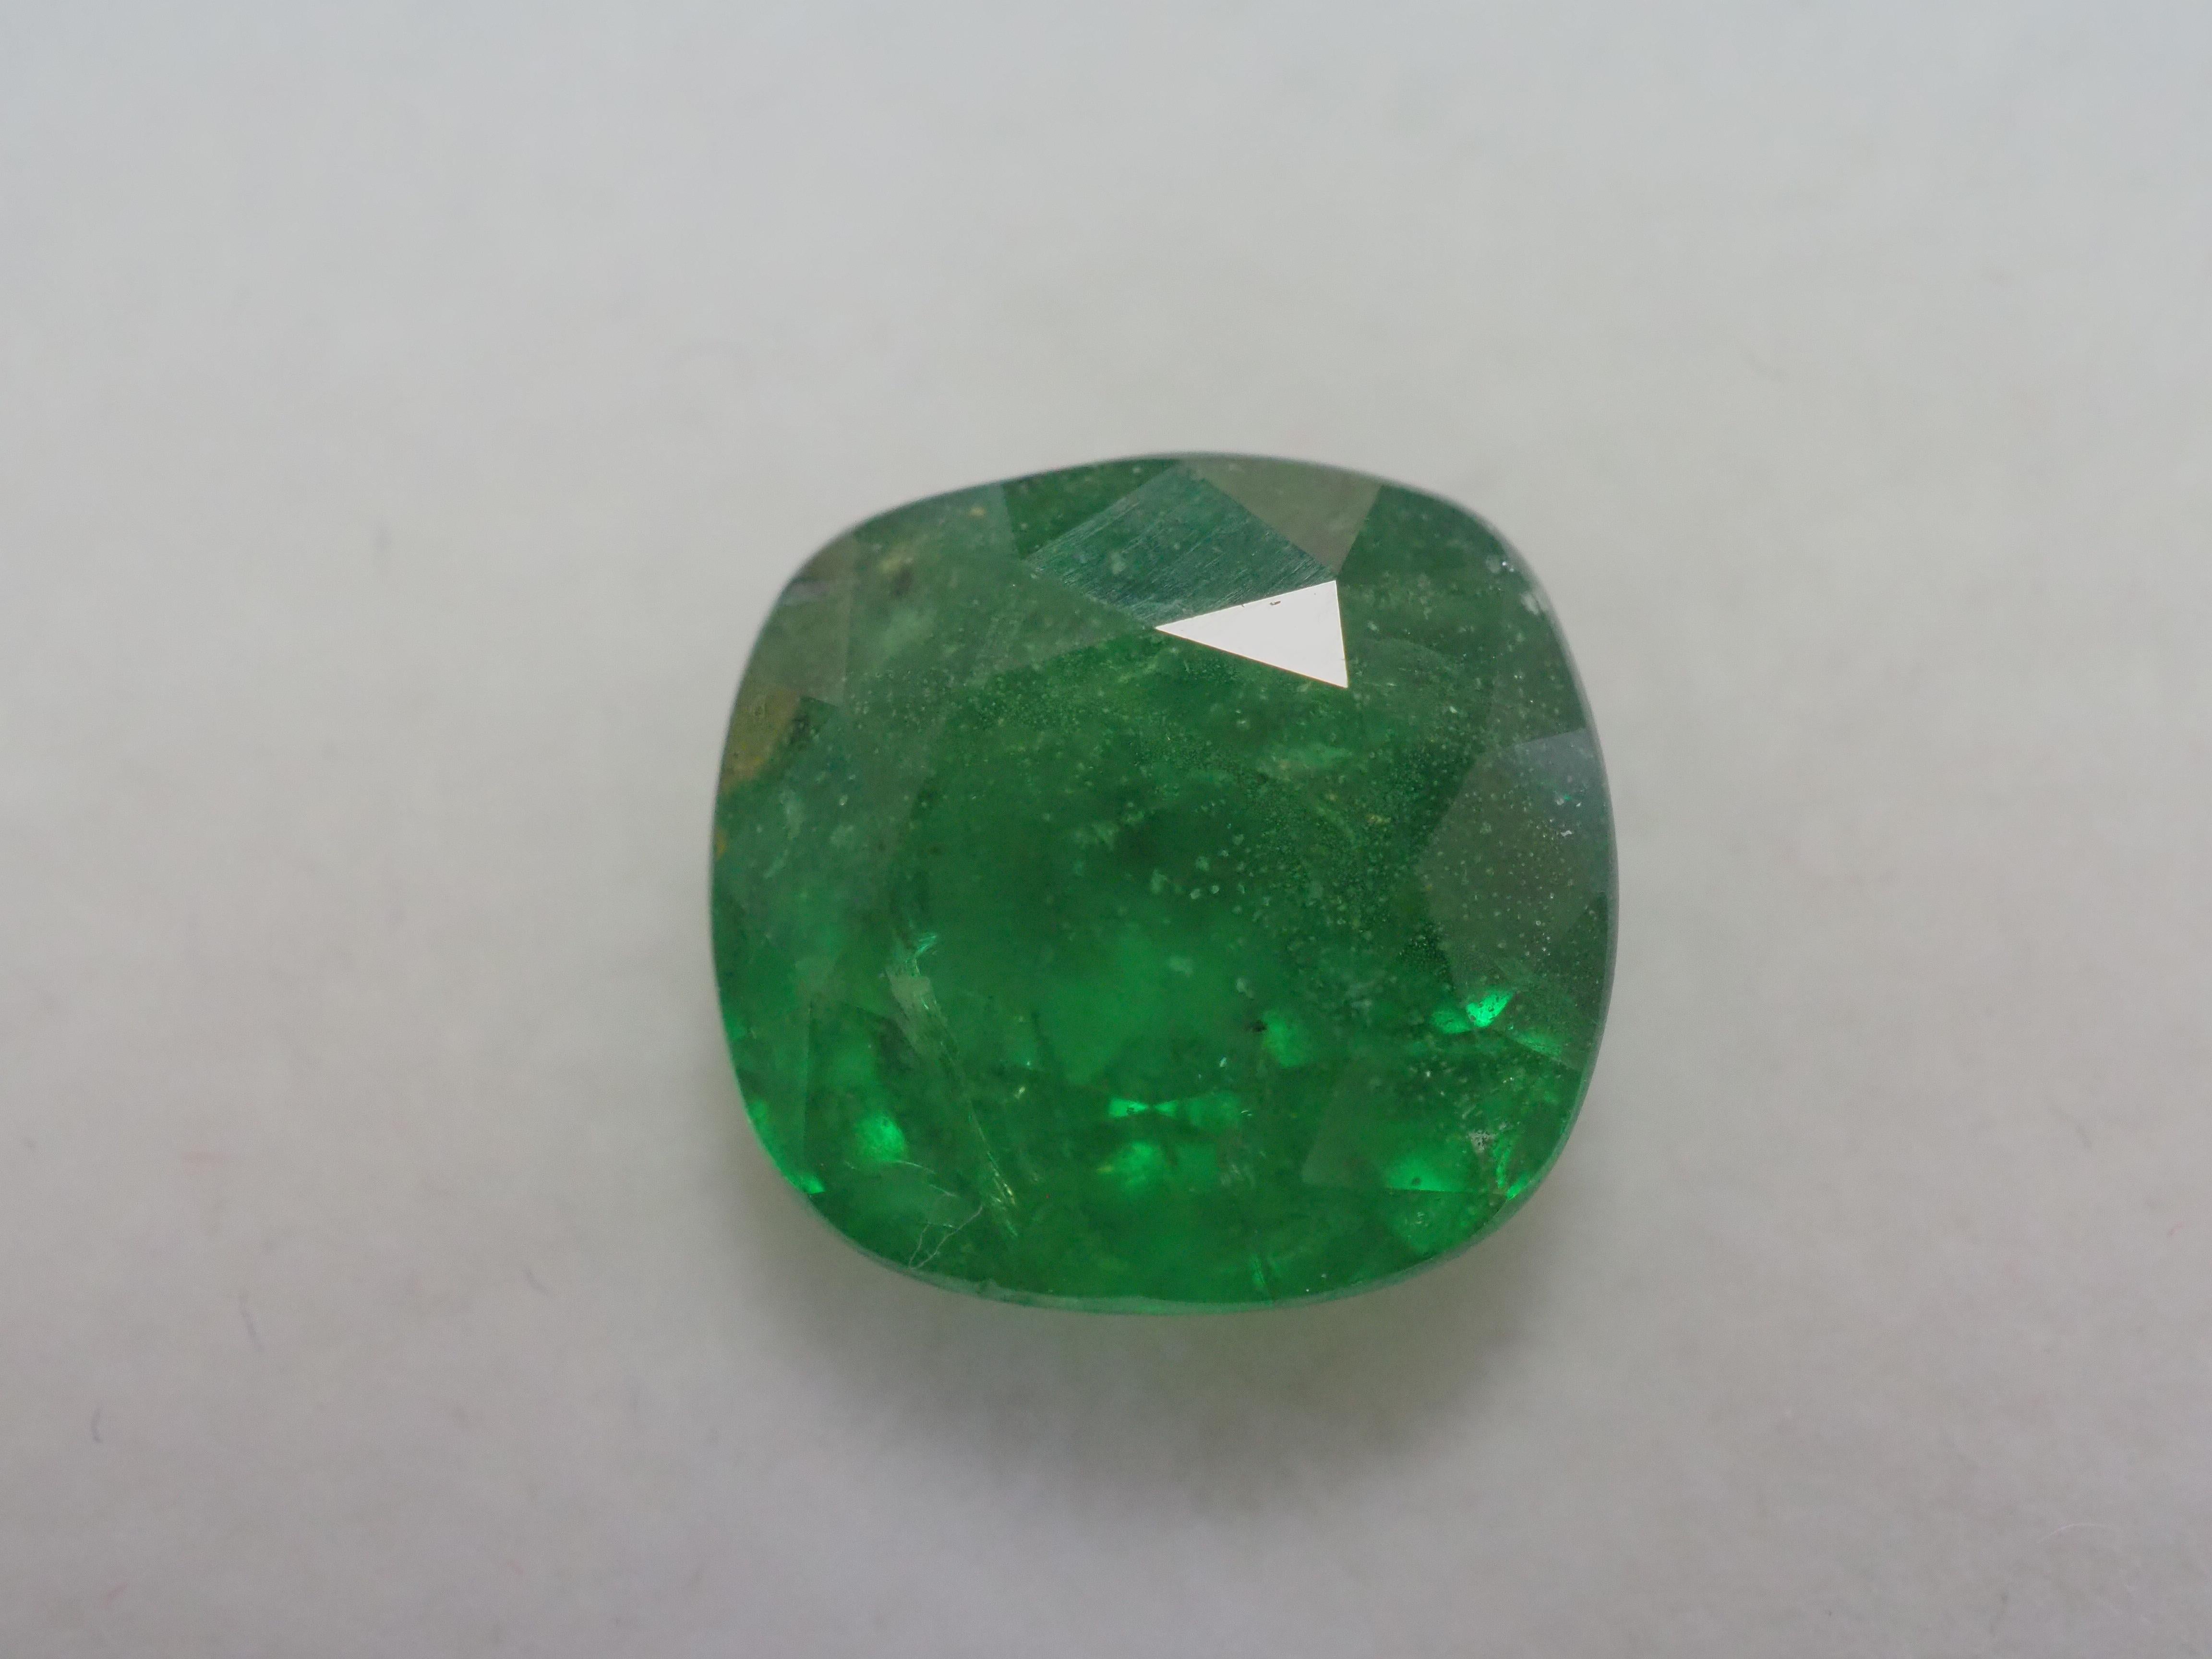 5.45 carats of cushion cut bright and sparkling green Tsavorite garnet gemstone, a gemstone with good cut and nice color with perfect size for a classy cocktail ring for all genders. It has some moderate inclusions and nicks which can see by naked